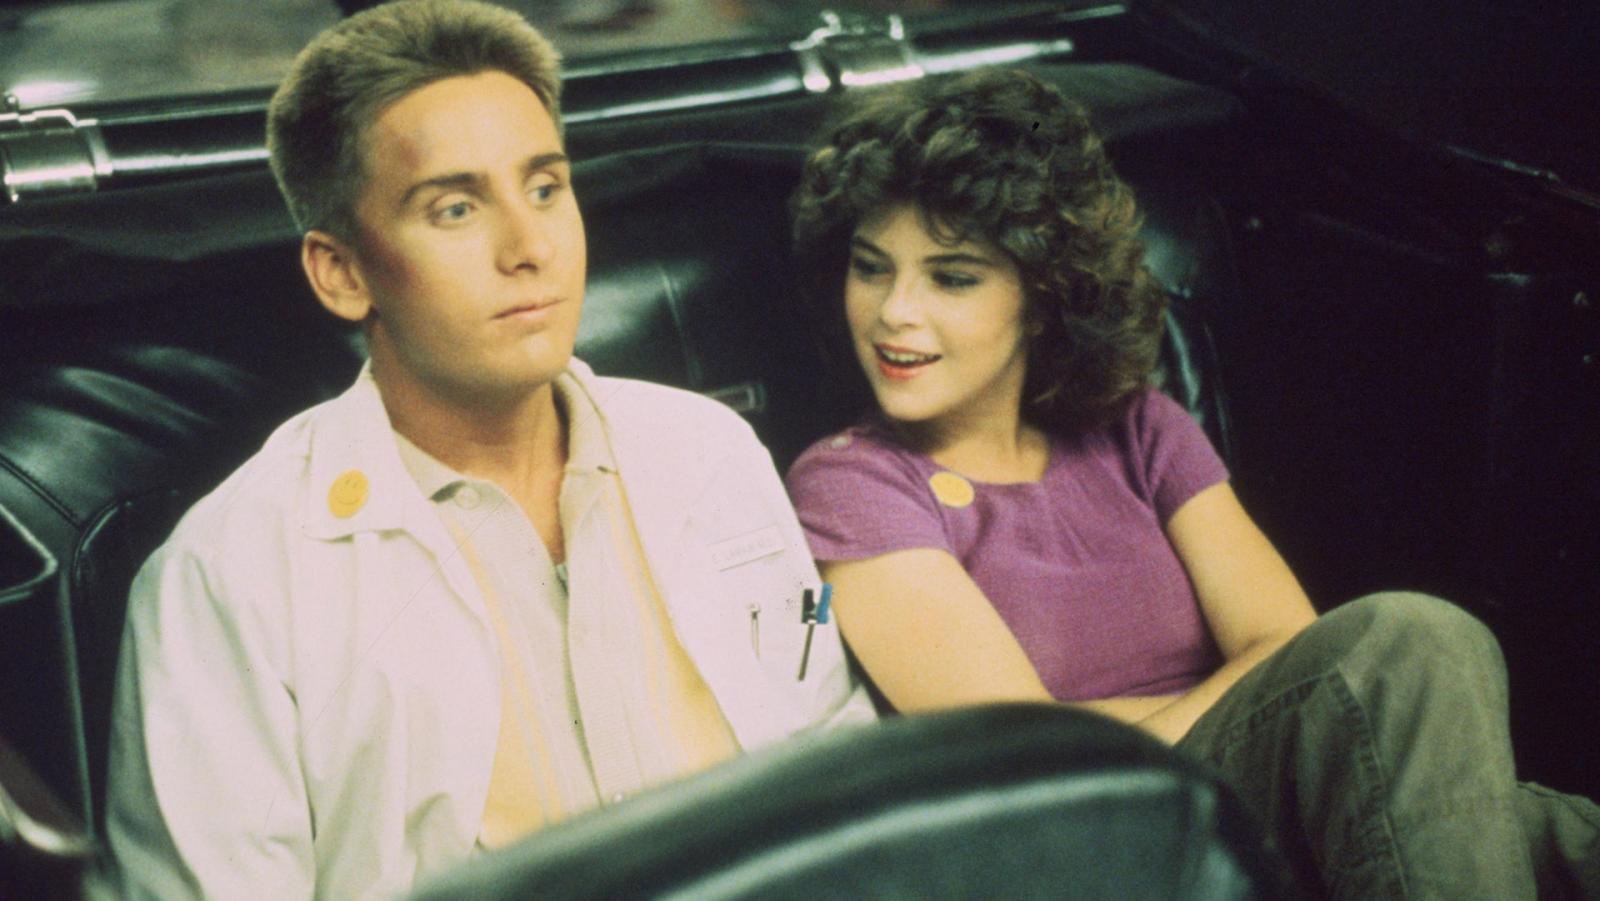 Top 8 Dark Comedies of the '80s That Still Hold Up, Ranked - image 8